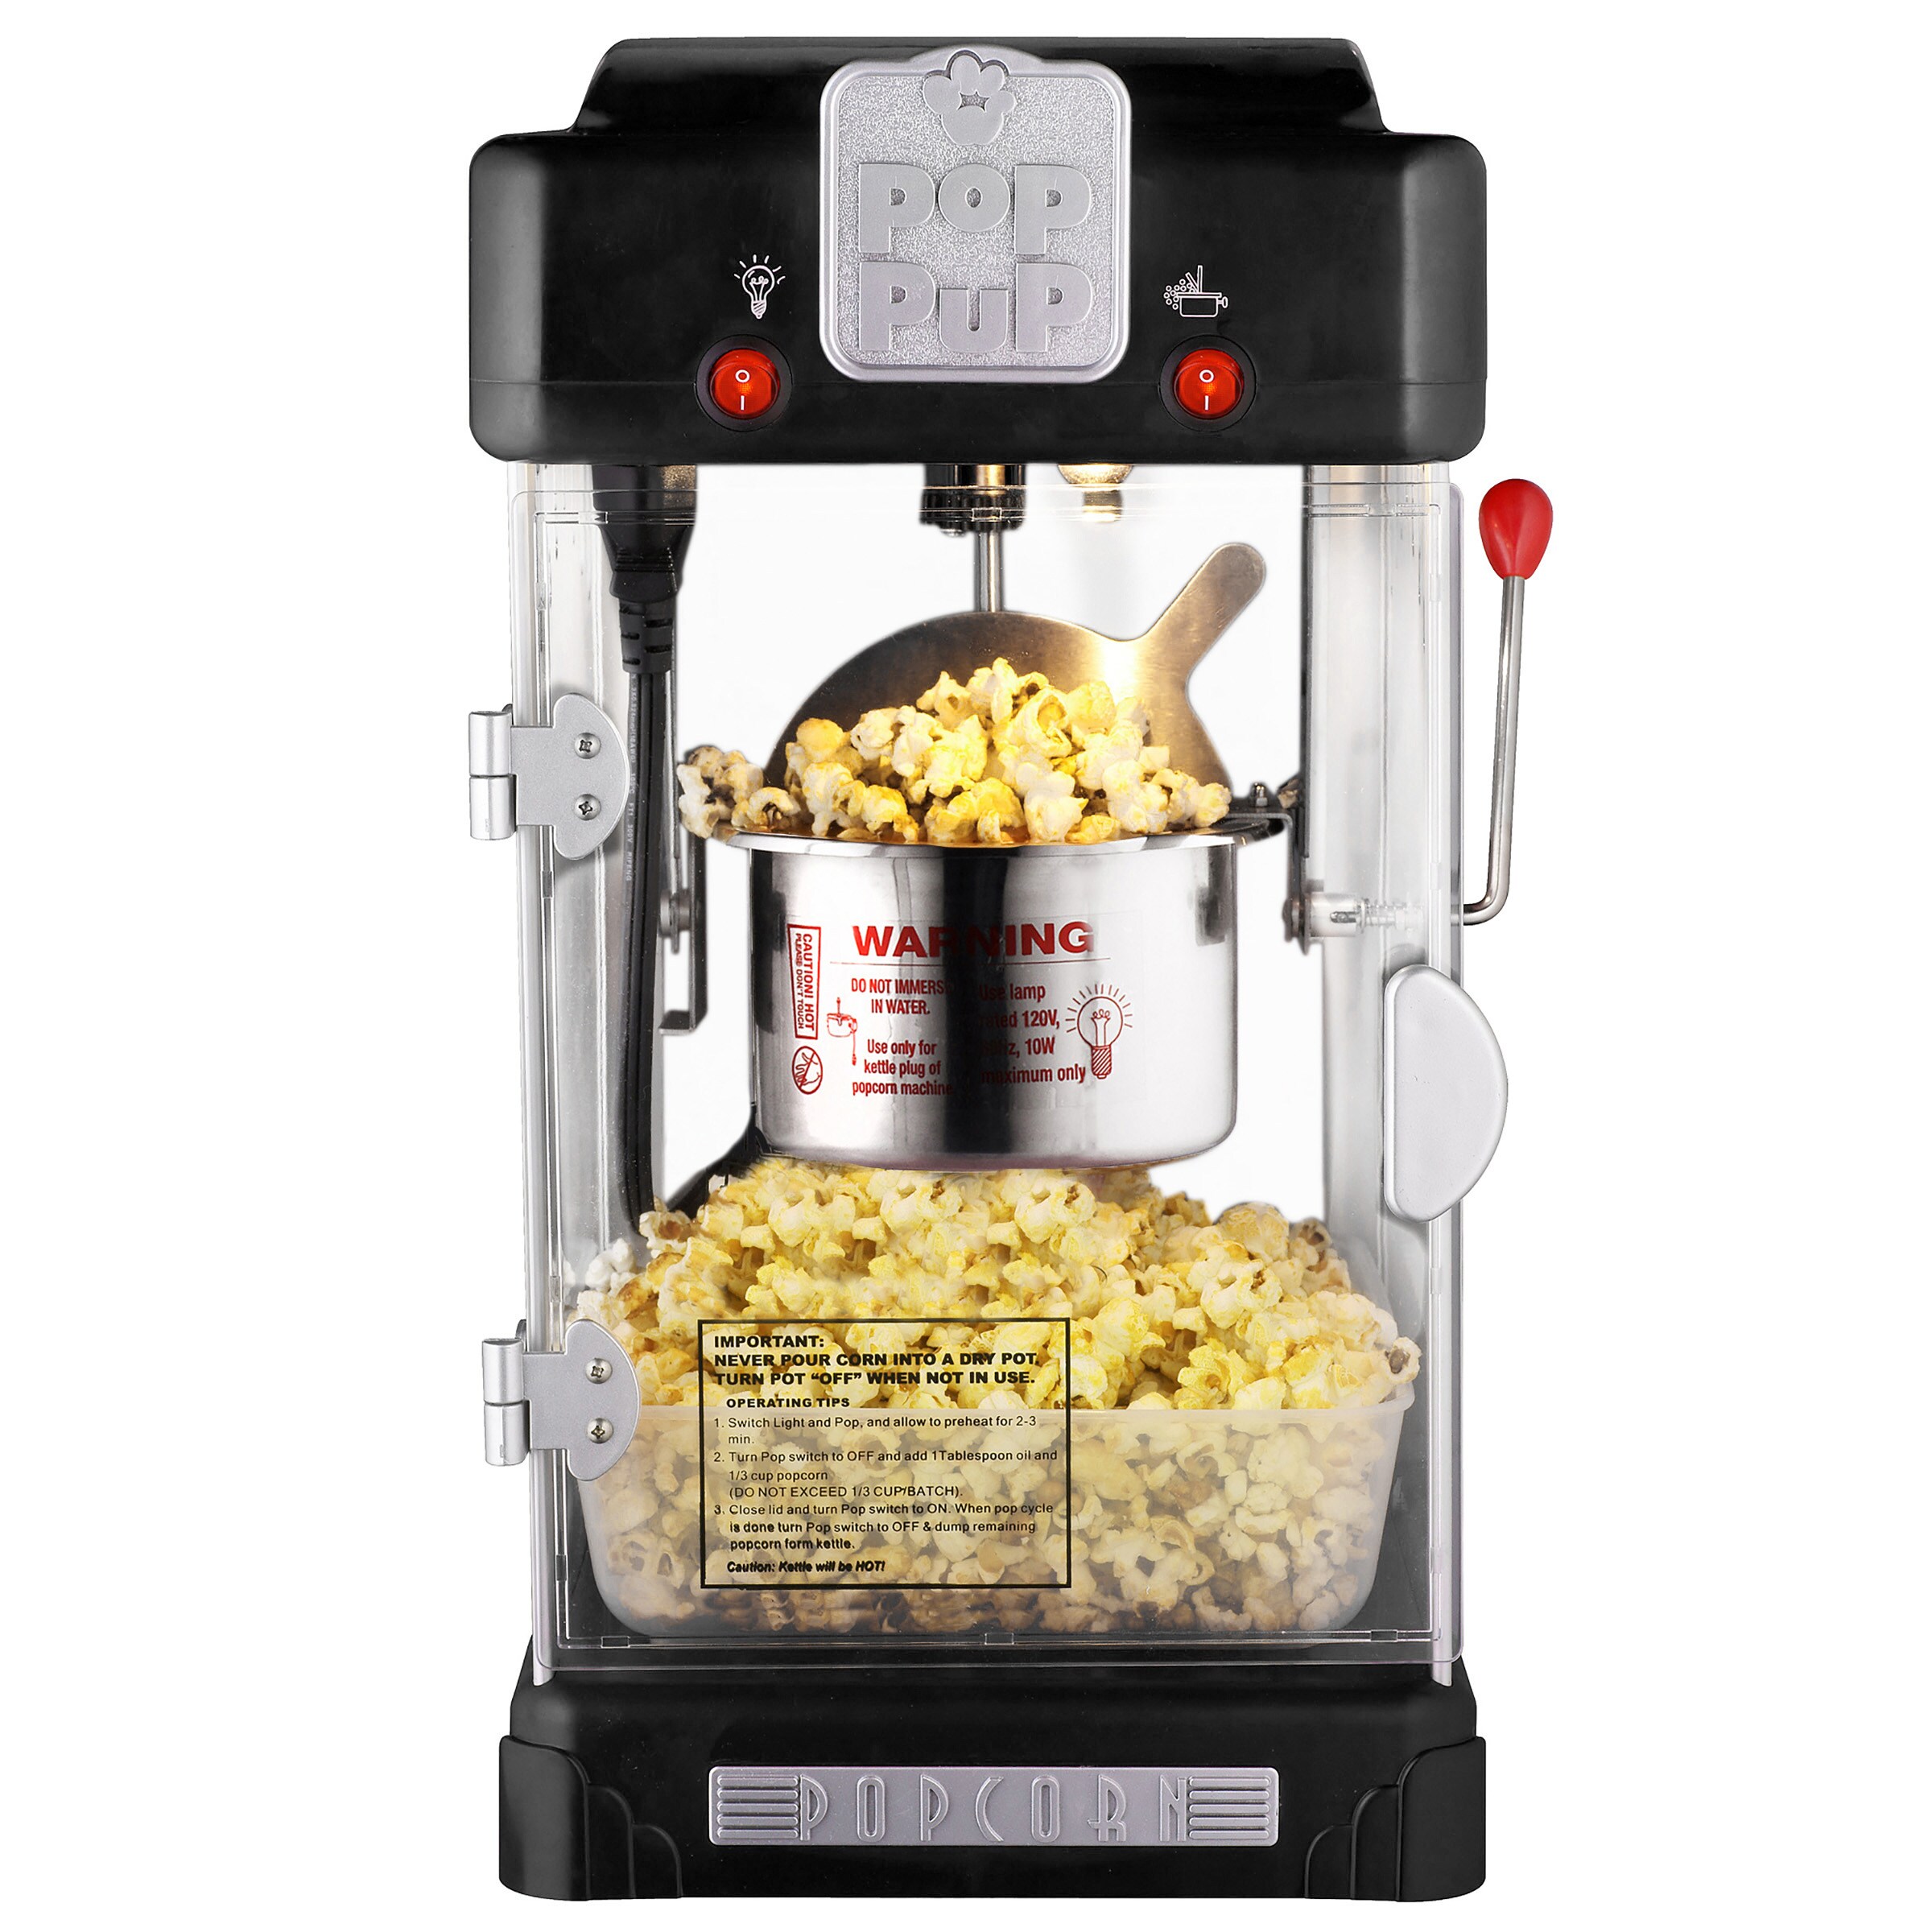 Campfire Popcorn Popper - Old Fashioned Popcorn Maker with Extended Handle  - Camping Gear by Great Northern Popcorn (Black)